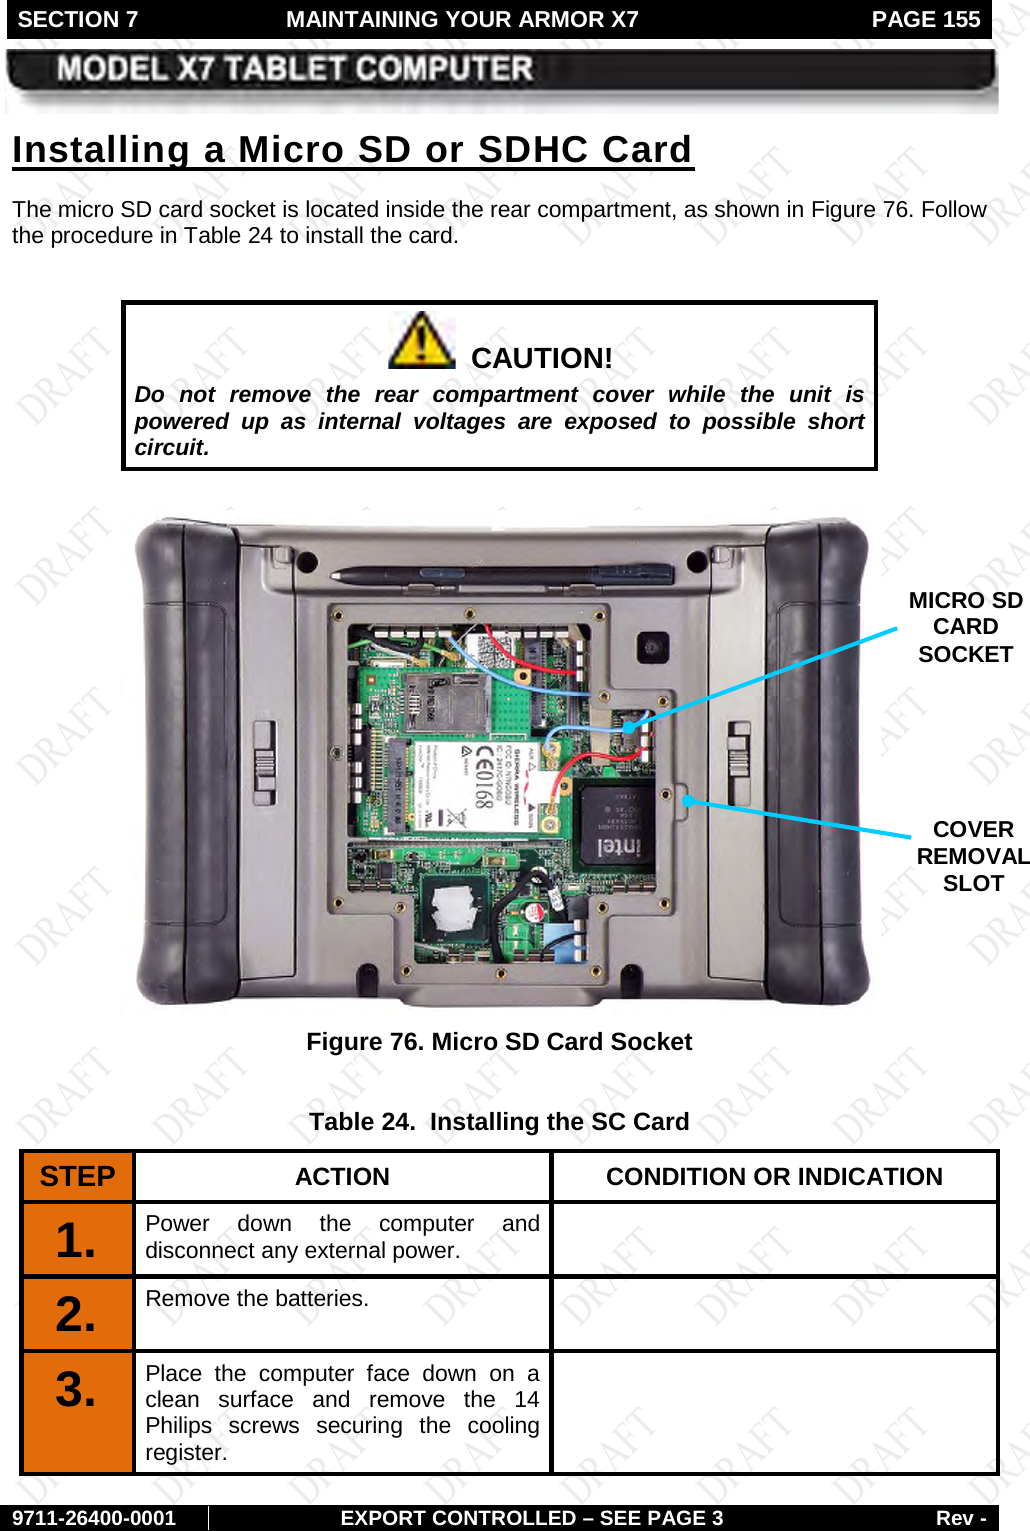 SECTION 7  MAINTAINING YOUR ARMOR X7  PAGE 155        9711-26400-0001 EXPORT CONTROLLED – SEE PAGE 3 Rev - The micro SD card socket is located inside the rear compartment, as shown in Installing a Micro SD or SDHC Card Figure 76. Follow the procedure in Table 24 to install the card.    CAUTION! Do not remove the rear compartment cover while the unit is powered up as internal voltages are exposed to possible short circuit.   Figure 76. Micro SD Card Socket  Table 24.  Installing the SC Card STEP  ACTION CONDITION OR INDICATION 1.  Power down the computer and disconnect any external power.  2.  Remove the batteries.   3.  Place the computer face down on a clean surface and remove the 14 Philips screws securing the cooling register.  MICRO SD CARD SOCKET COVER REMOVAL SLOT 